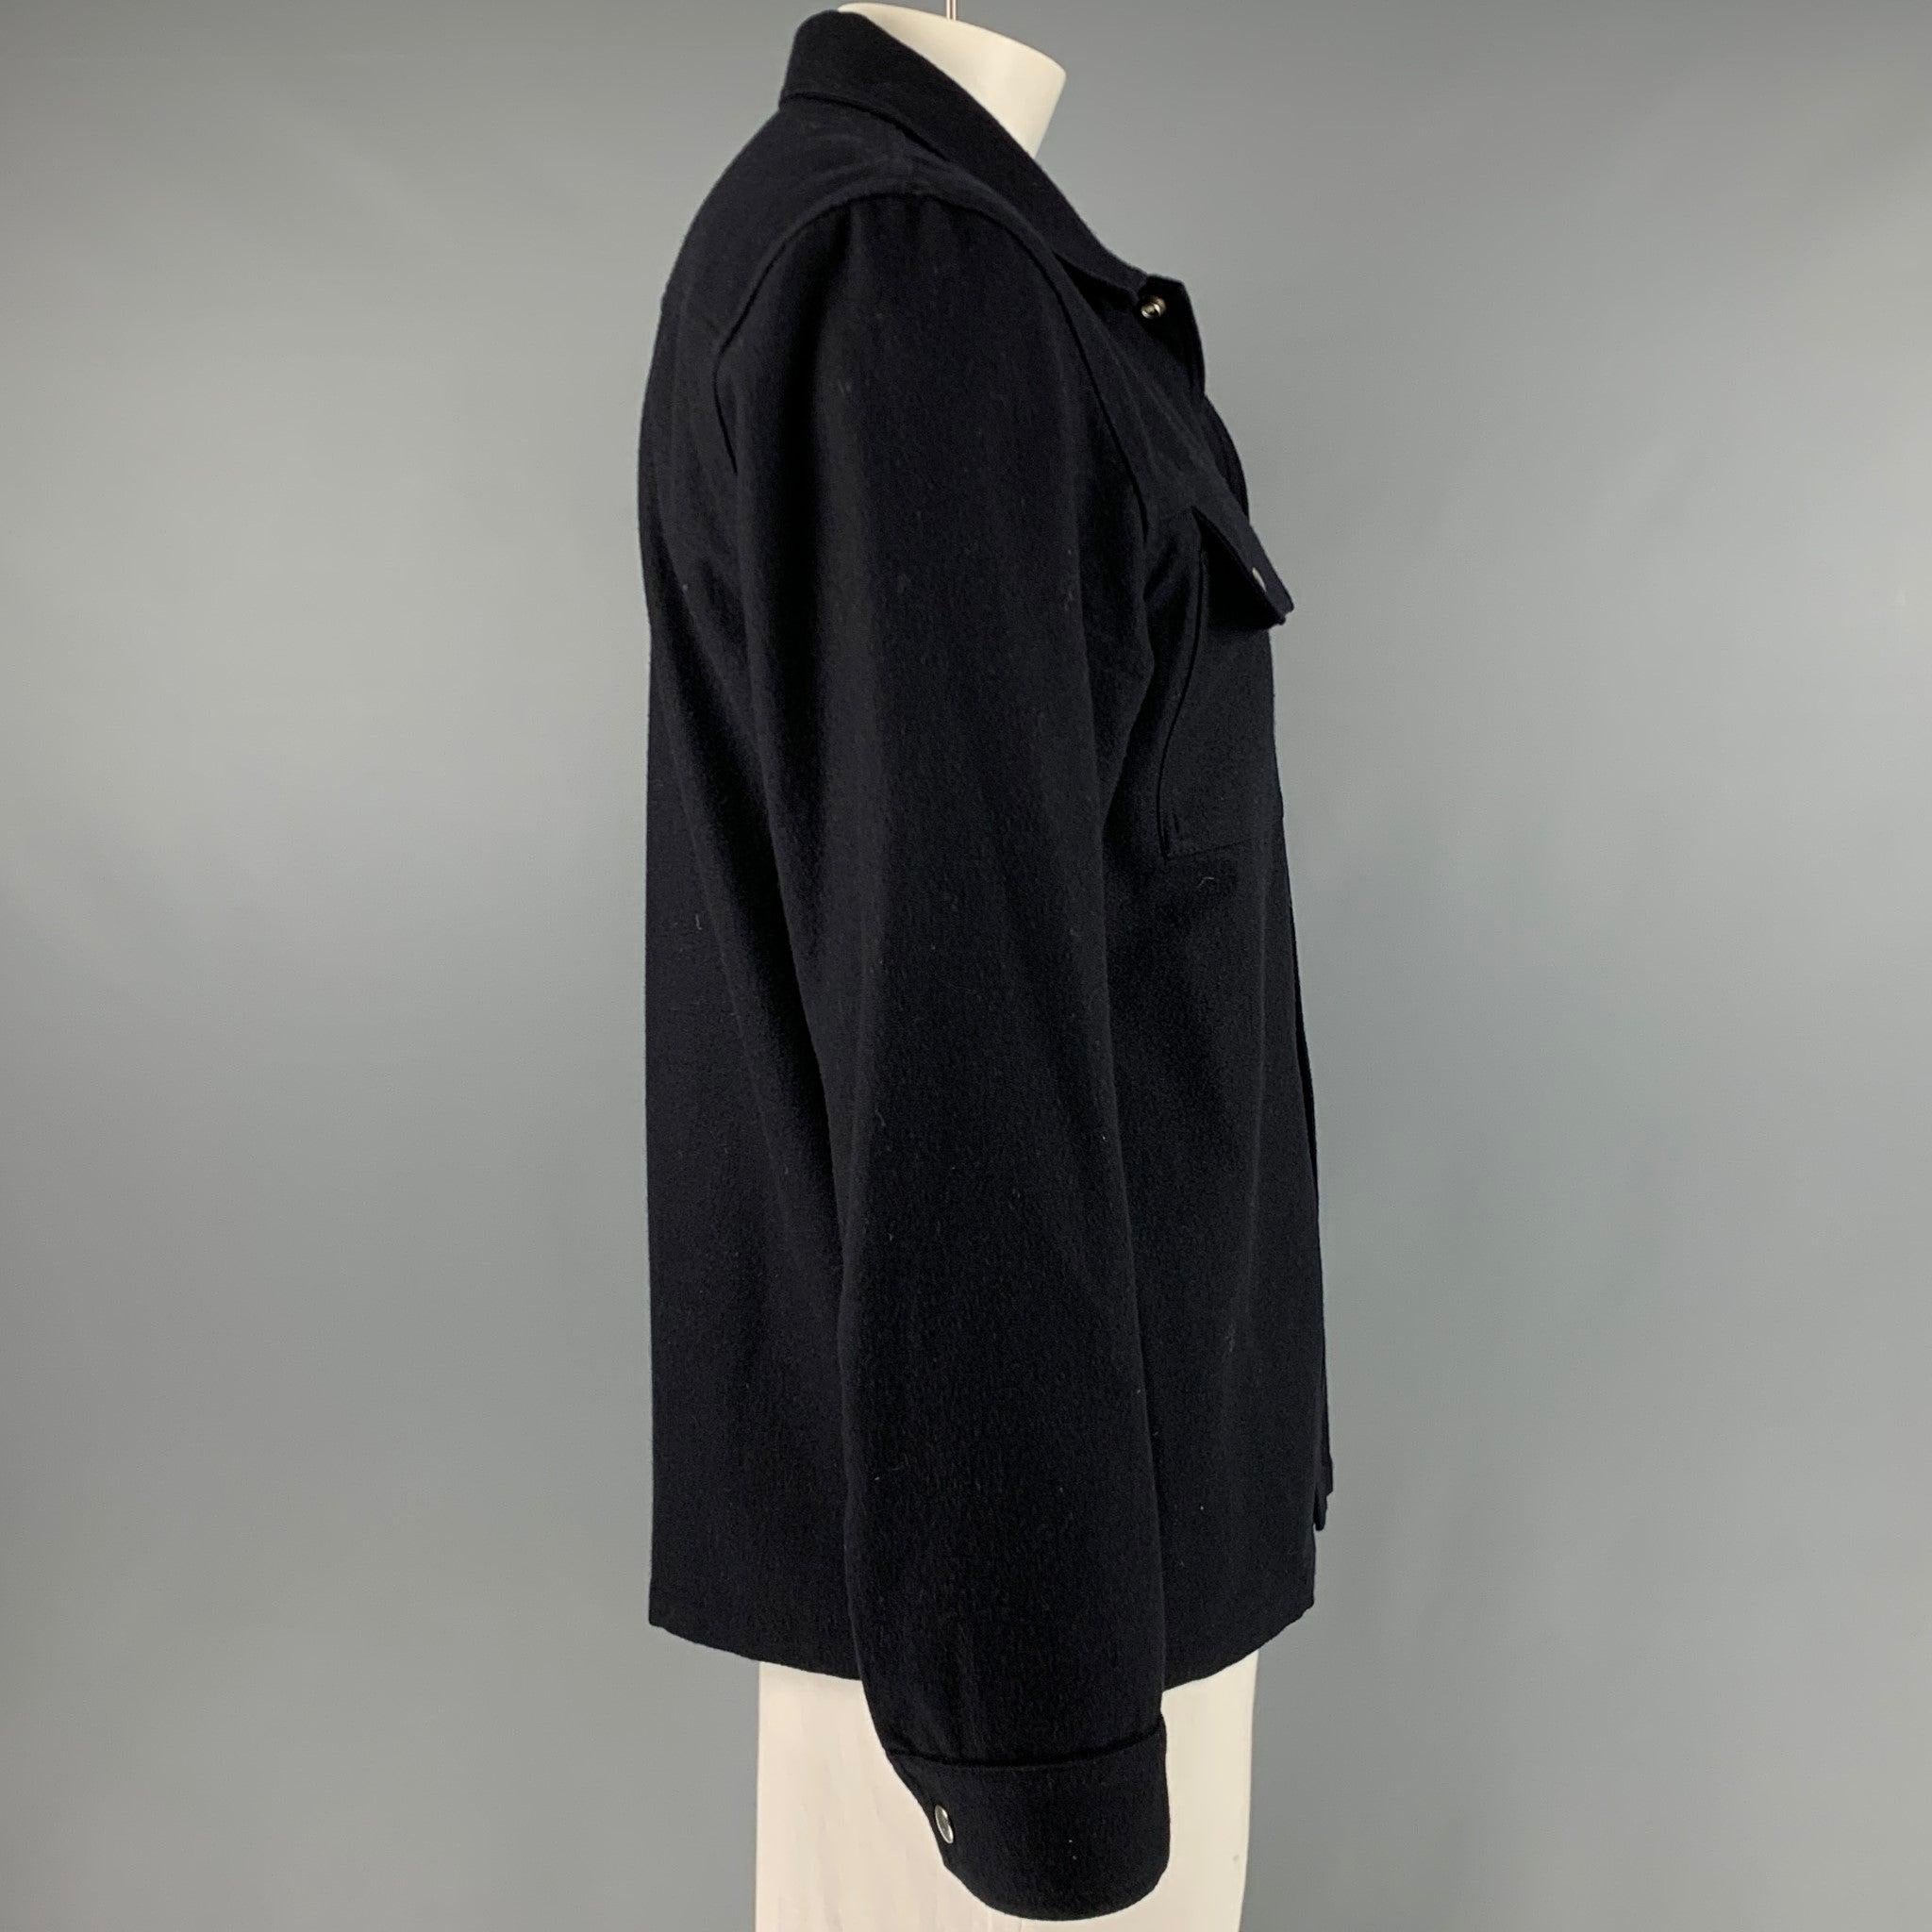 SANDRO long sleeve shirt
in a black wool blend fabric featuring two patch pockets, spread collar, and snap closure.Excellent Pre-Owned Condition. 

Marked:   XXL 

Measurements: 
 
Shoulder: 20 inches Chest: 45 inches Sleeve: 26 inches Length: 29